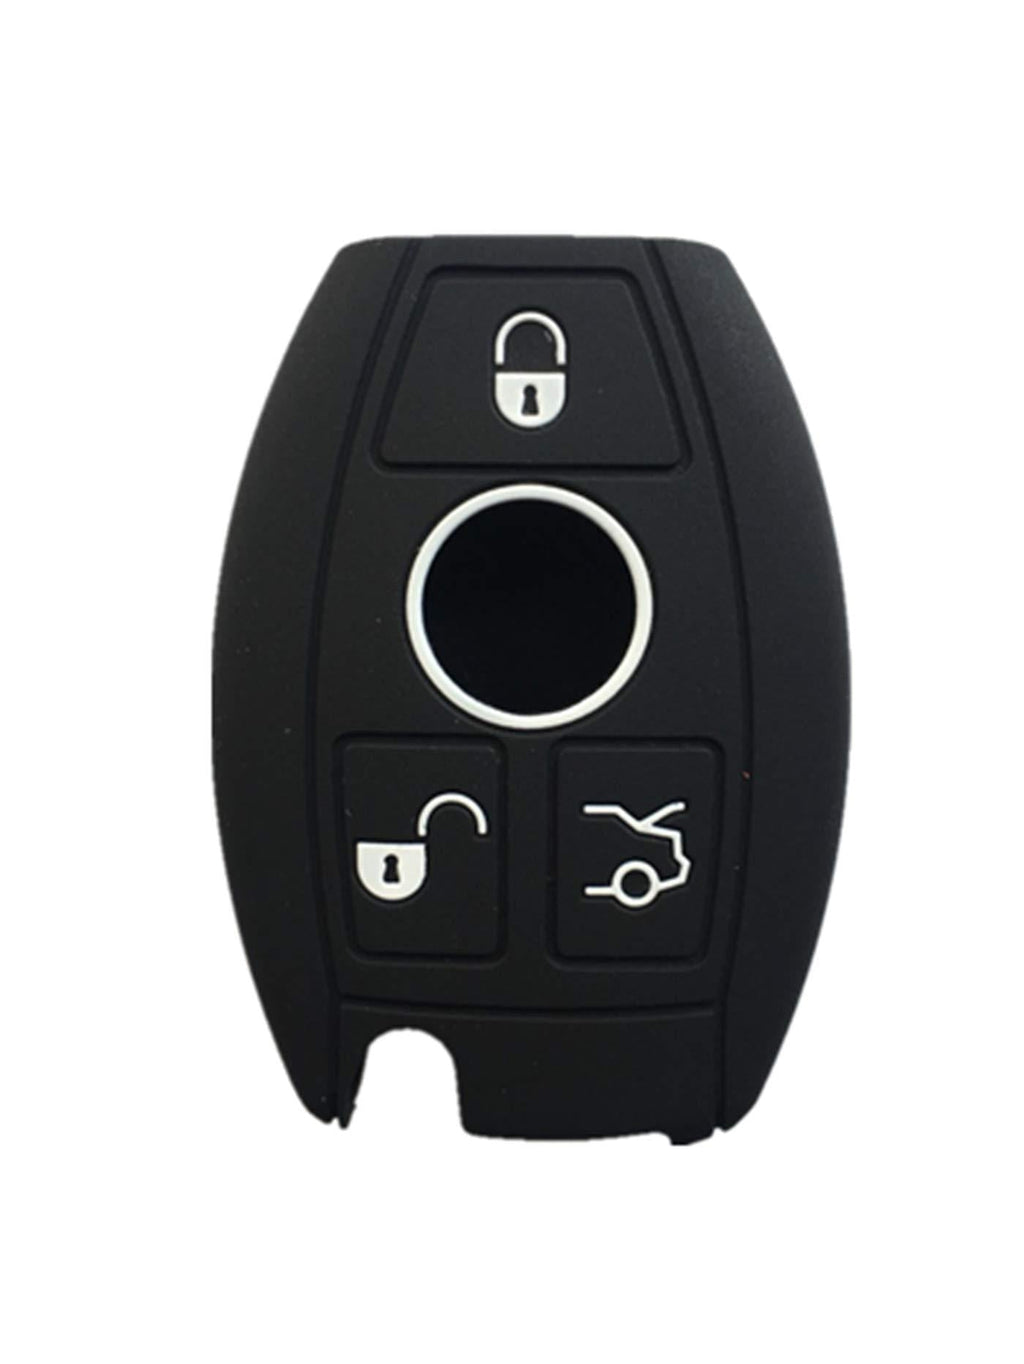 Rpkey Silicone Keyless Entry Remote Control Key Fob Cover Case protector Replacement Fit For Mercedes Benz W203 W210 W211 AMG W204 C E R CL GL S SL BGA CLS CLK CLA SLK Case Classe IYZ3312 MB-KEYPROG2 - LeoForward Australia